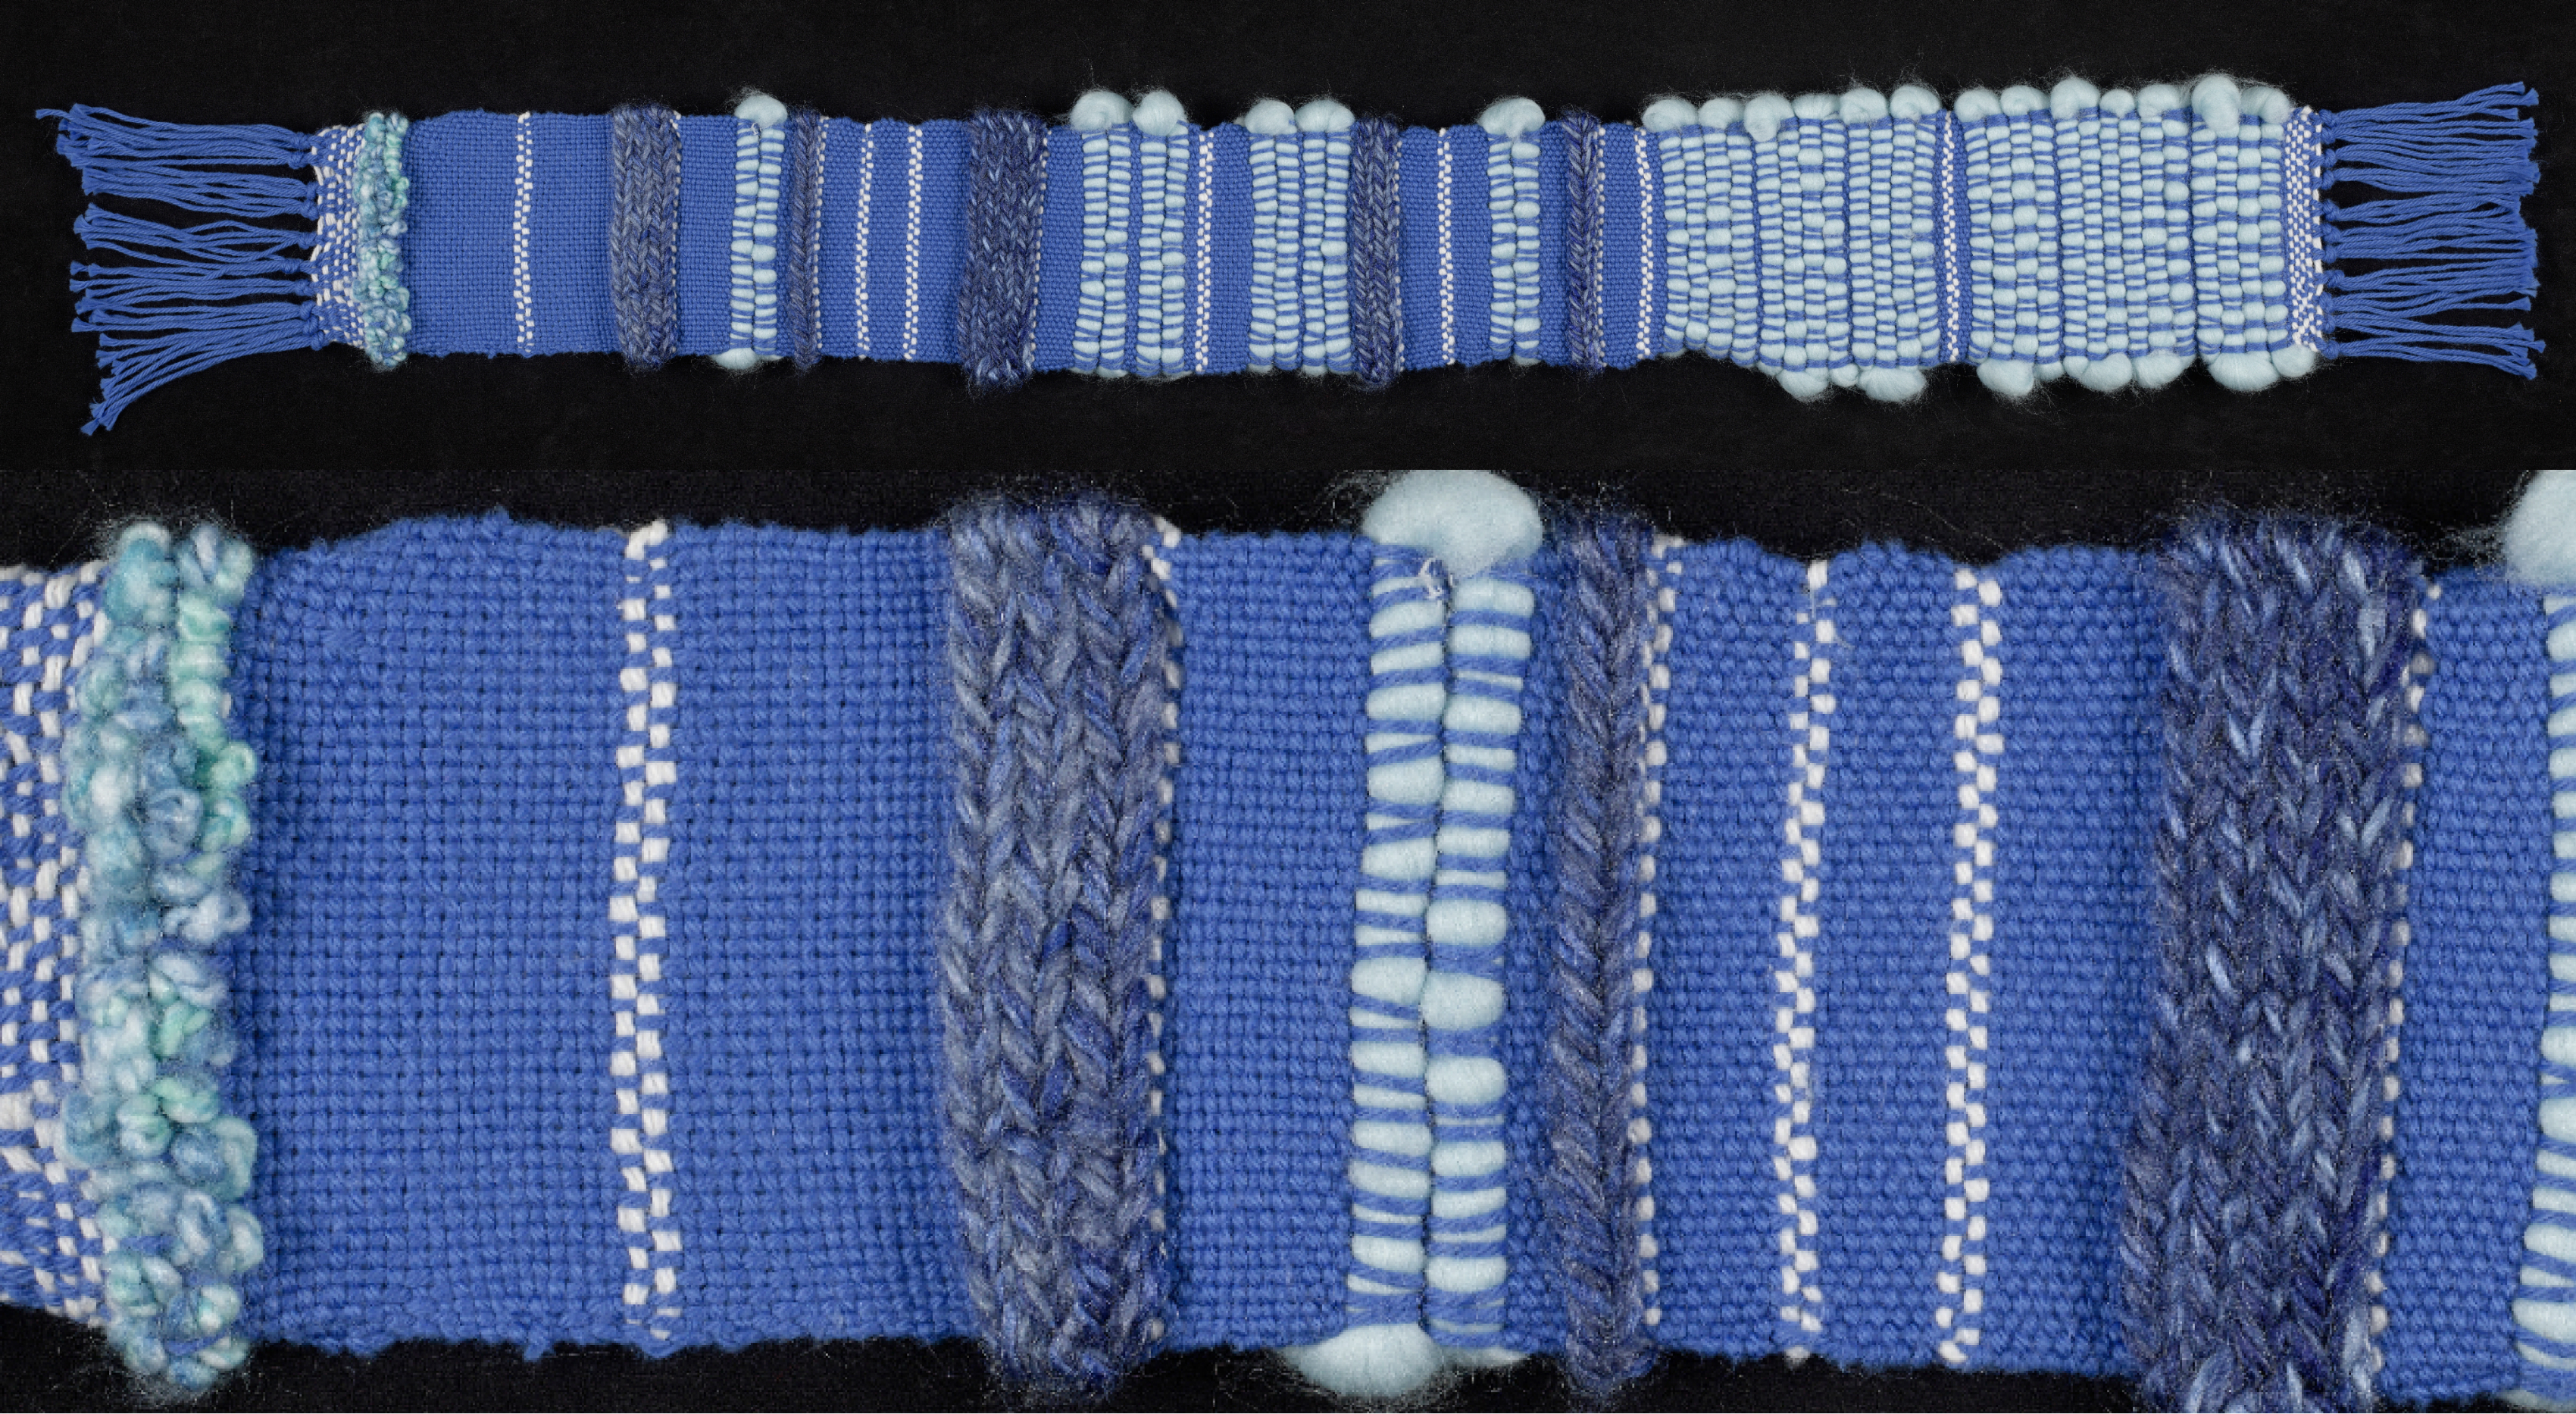 Composite of two images from the high resolution image shown in the deep zoom viewer: one showing the full length of the woven piece, and another with a close up showing the threads and different weaving patterns.